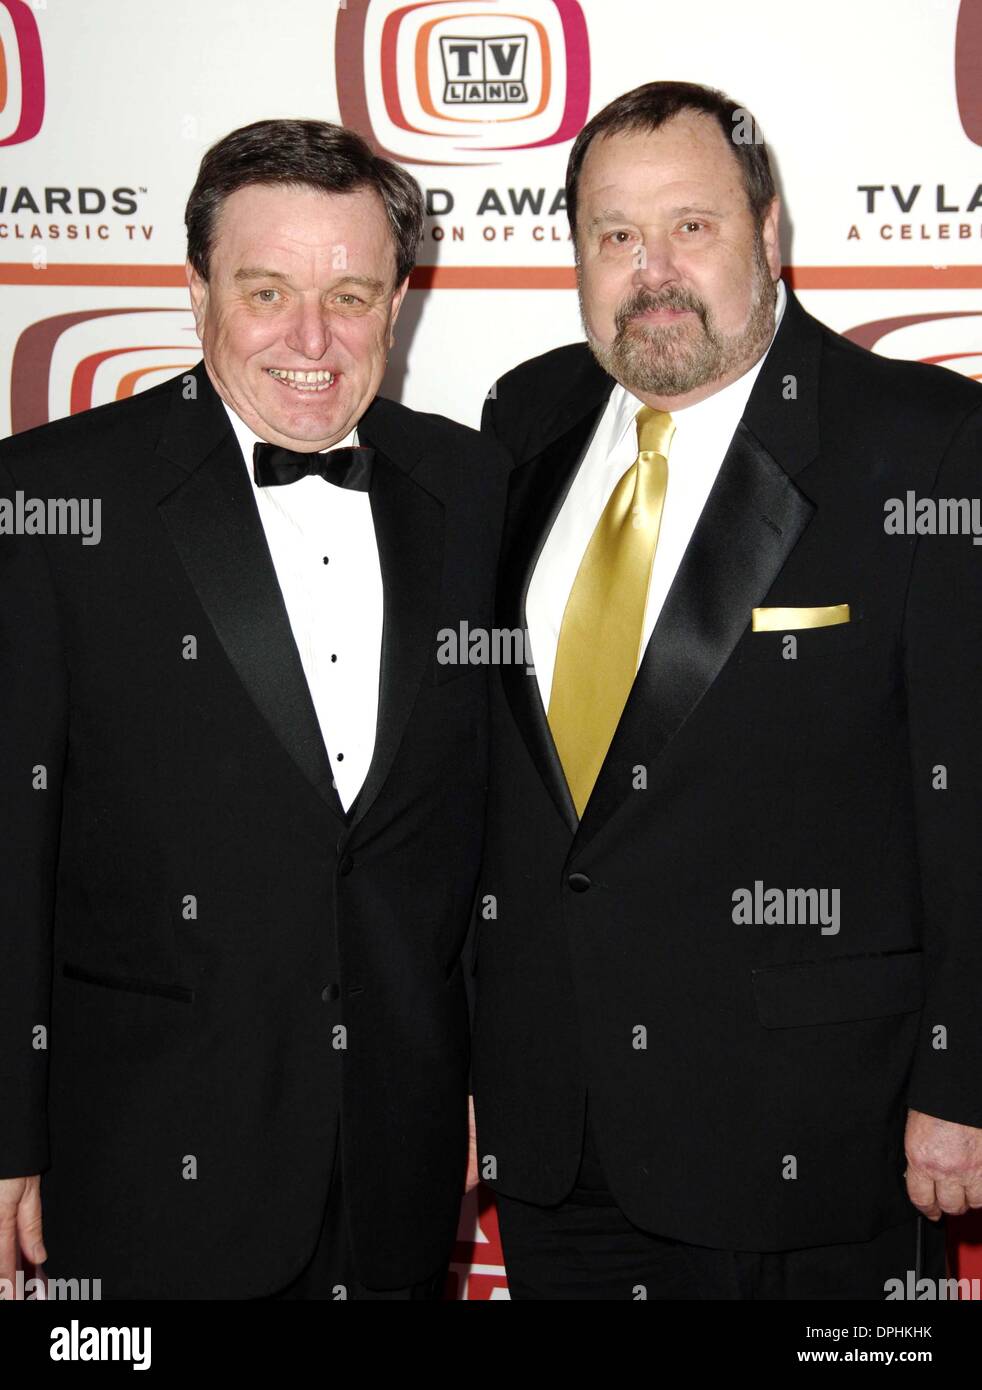 Mar. 19, 2006 - Hollywood, California, U.S. - SANTA MONICA, CA MARCH 19, 2006 (SSI) - -.Actors Jerry Mathers and Frank Bank pose for photographers, during the 2006 TV LAND AWARDS, held at the Barker Hanger, on March 19, 2006, in Santa Monica, California.   / Super Star Images.  -   K47283MG(Credit Image: © Michael Germana/Globe Photos/ZUMAPRESS.com) Stock Photo